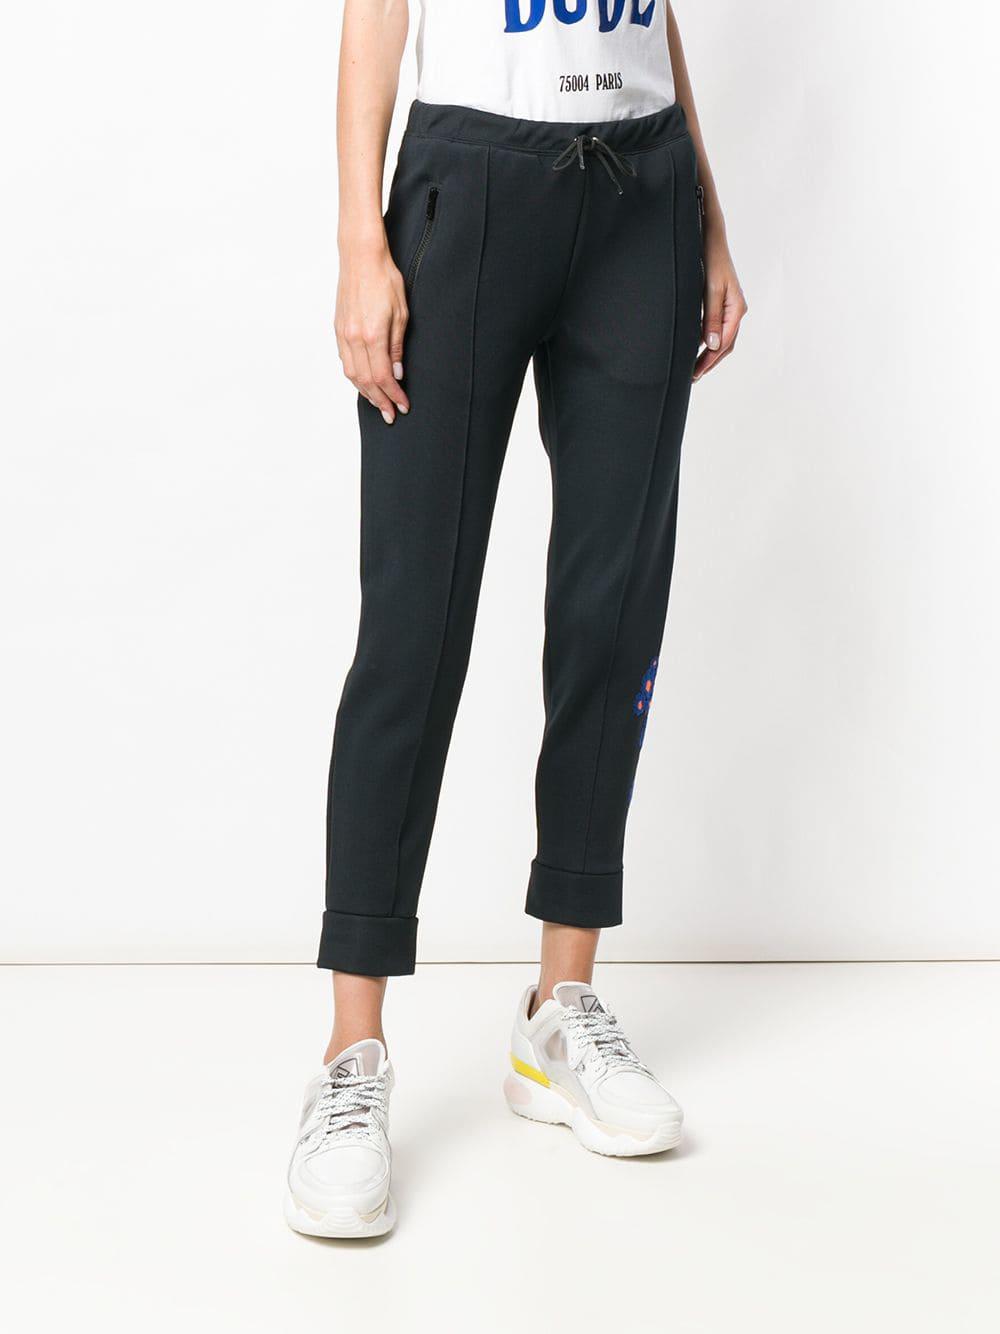 Être Cécile Synthetic Floral Embroidered Track Pants in Black - Lyst